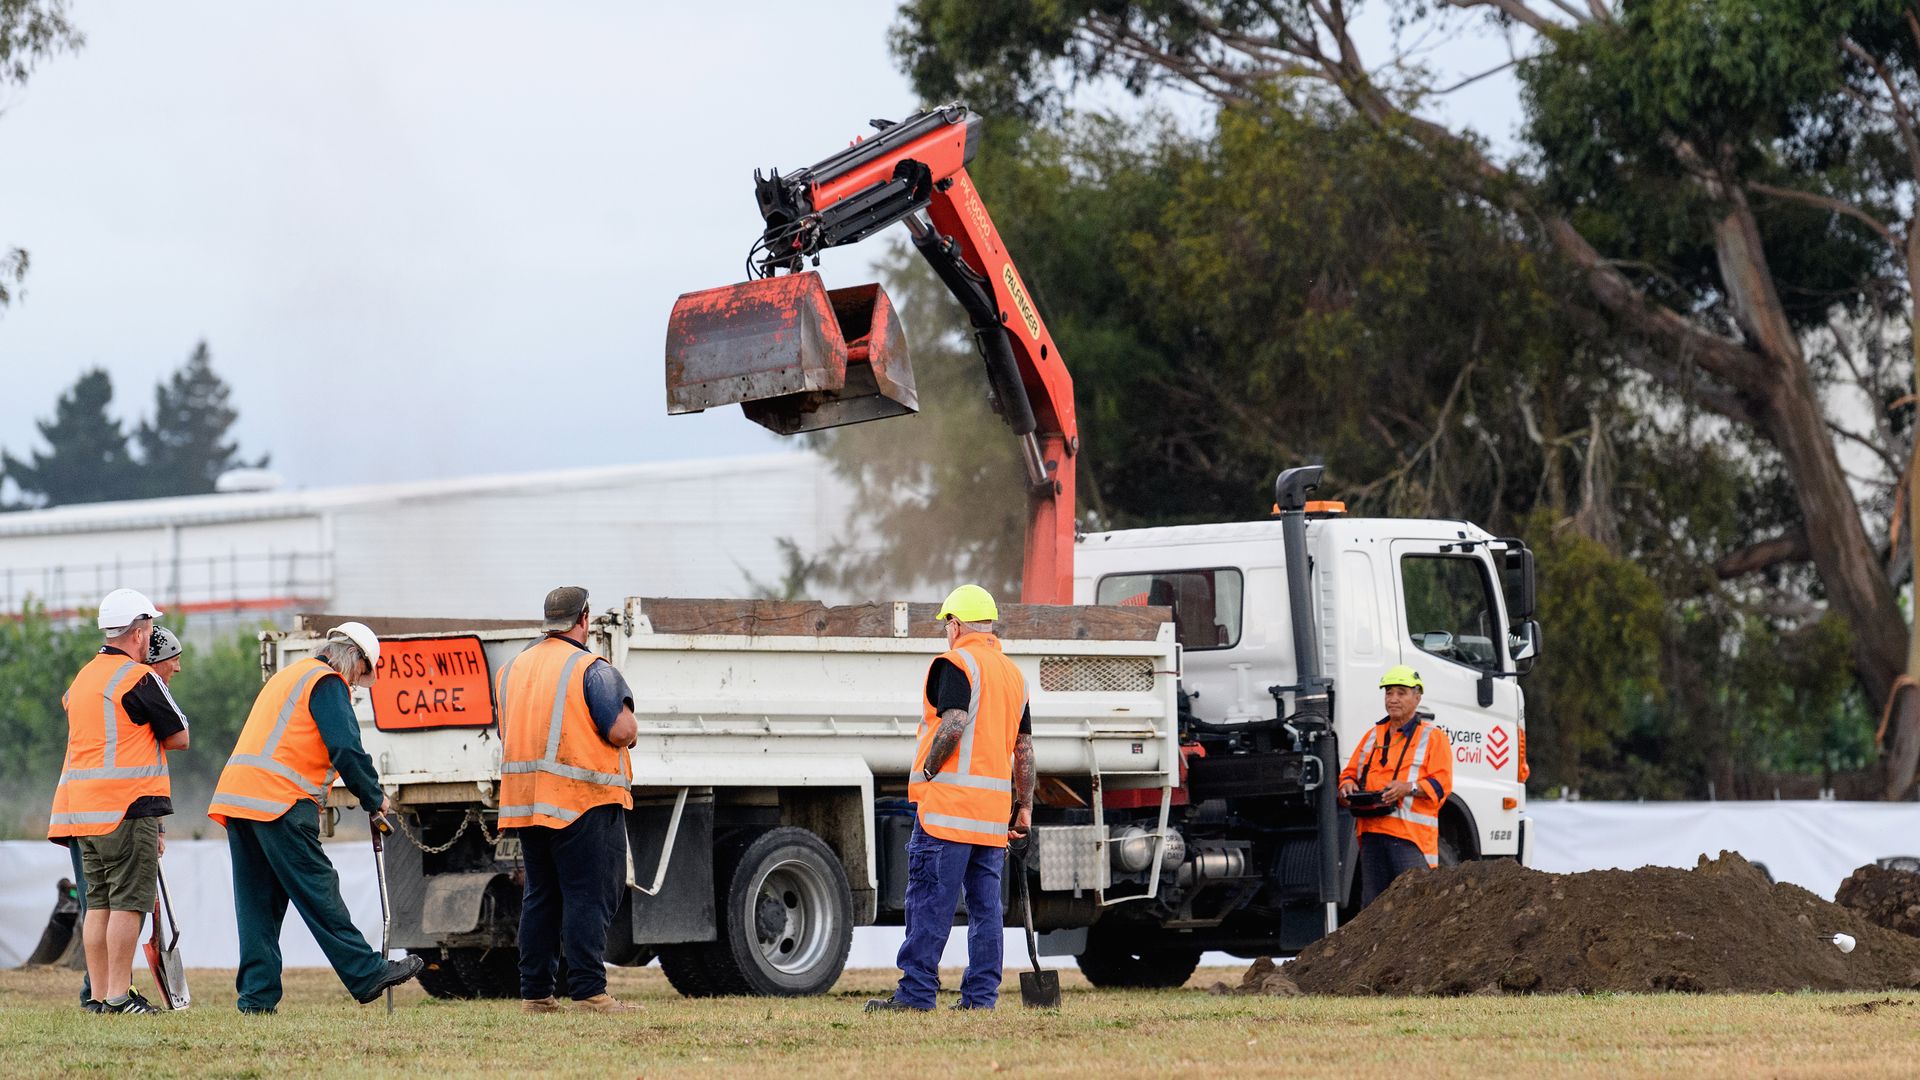 Workers begin digging graves for the victims of the New Zealand mosque attacks.